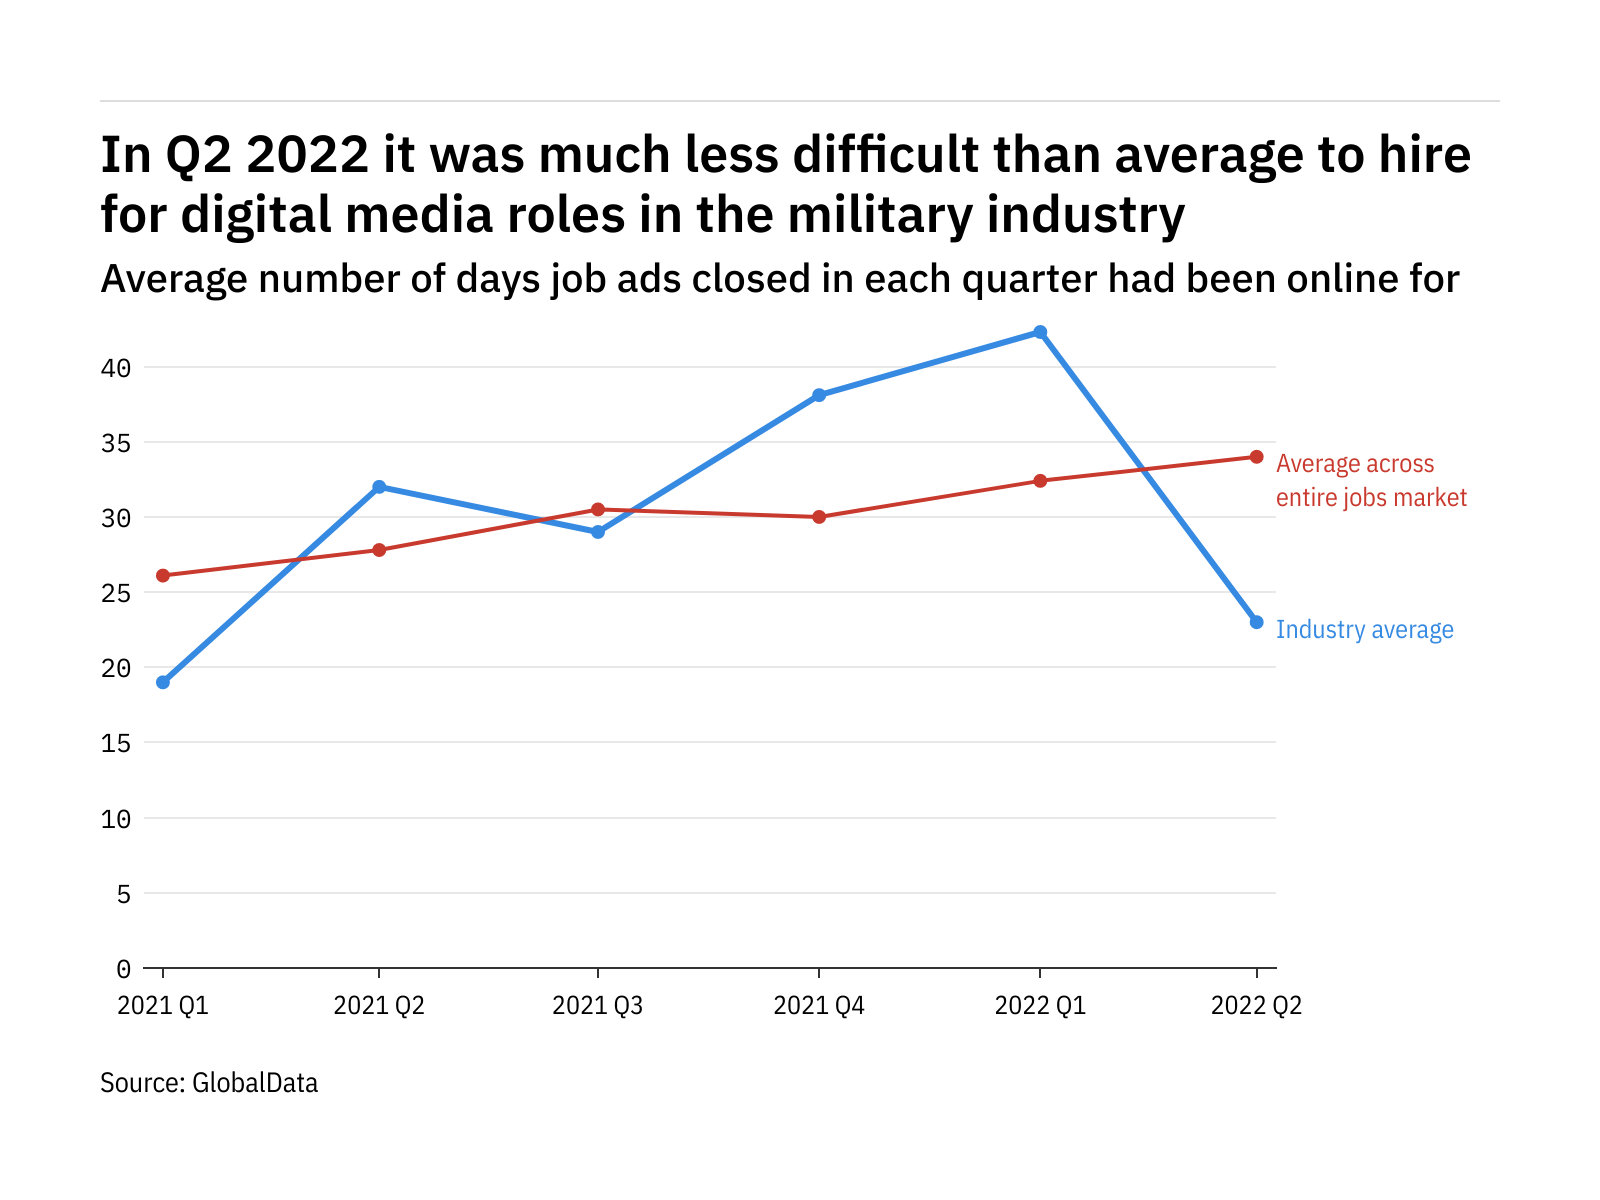 The military industry found it harder to fill digital media vacancies in Q2 2022